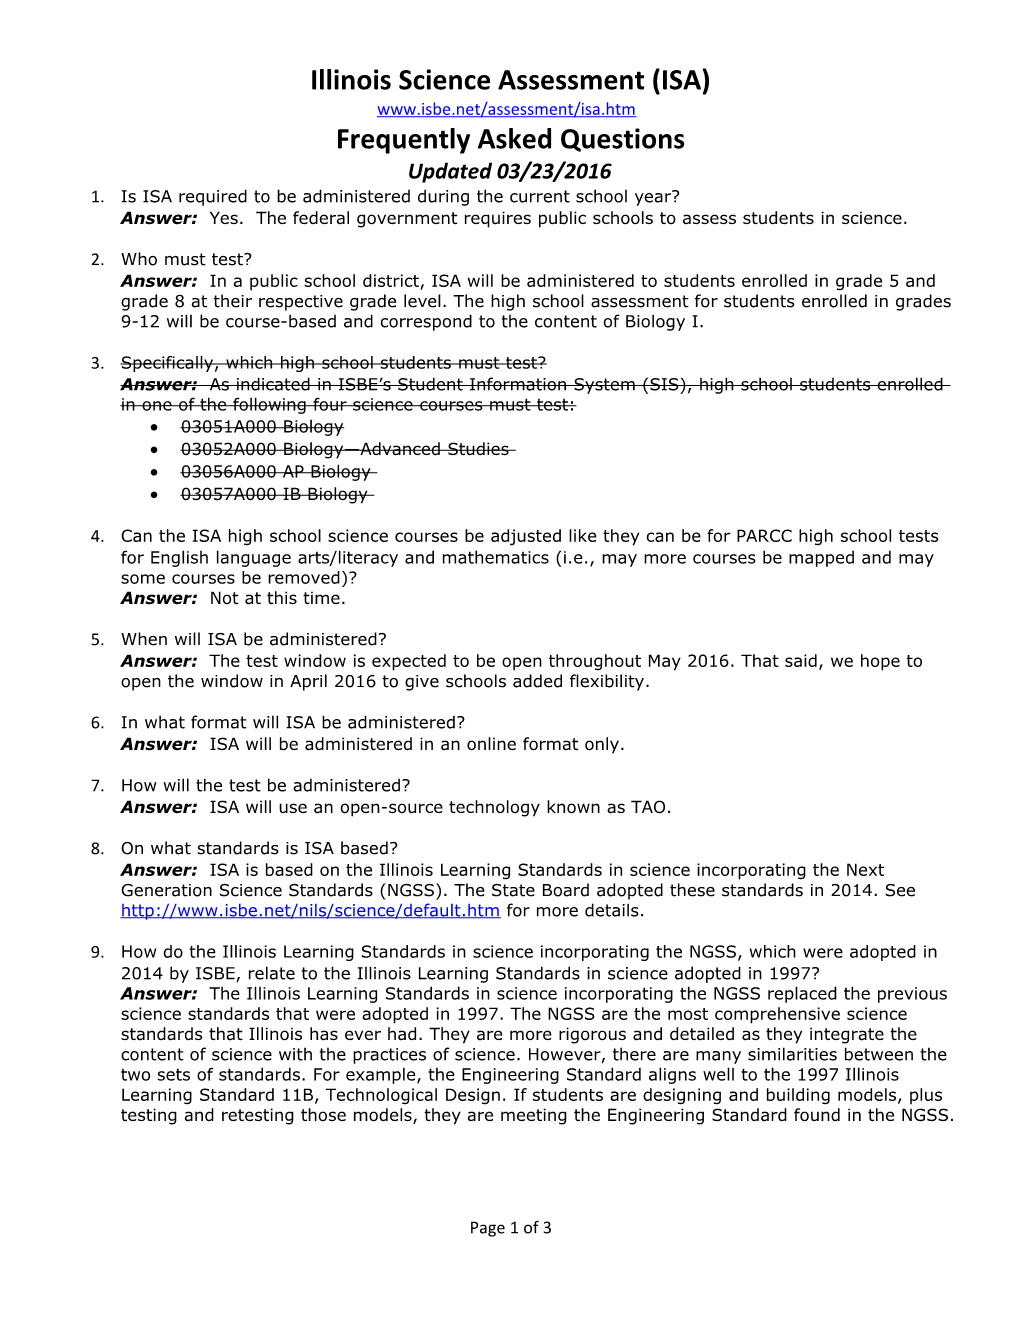 Illinois Science Assessment (ISA)Frequently-Asked Questions Updated 03/17/2016